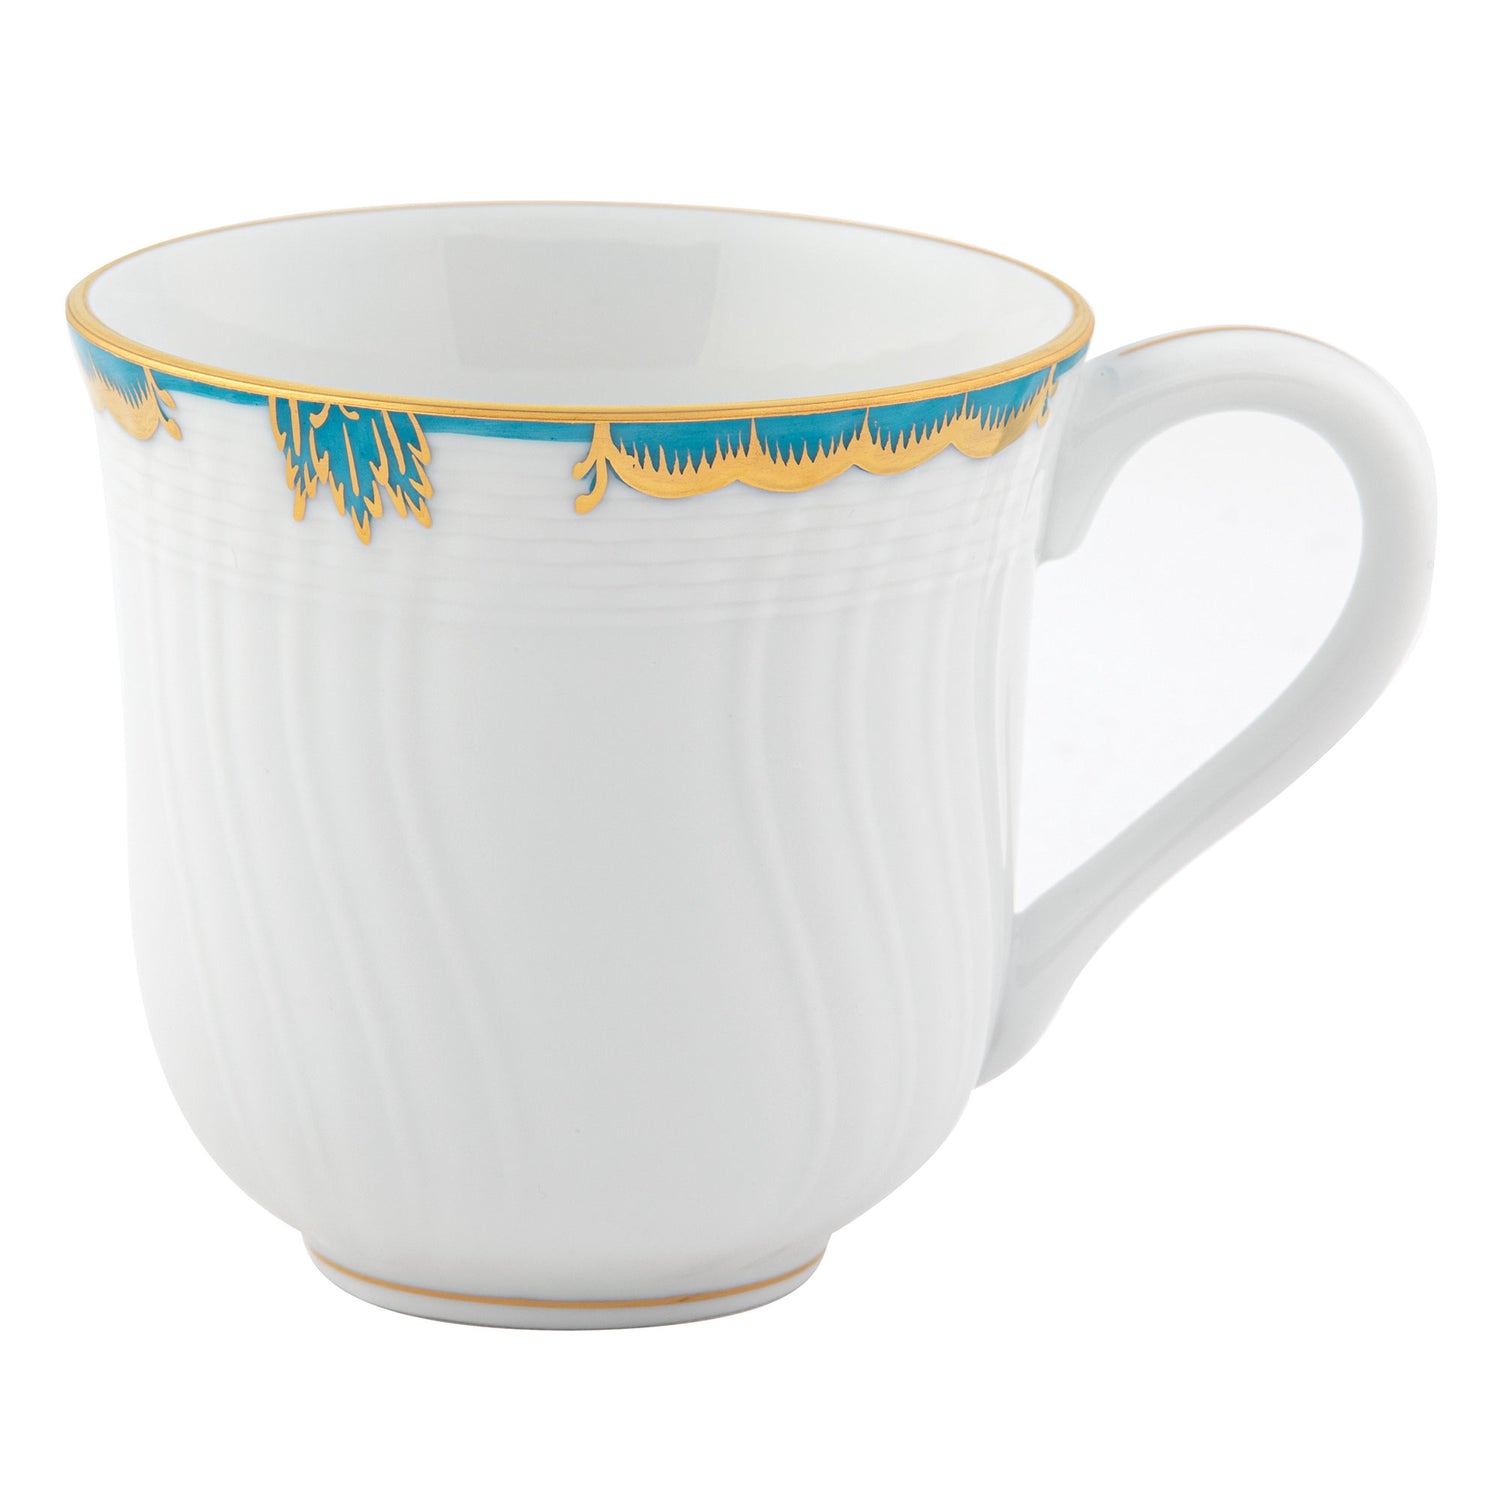 Herend Princess Victoria, TURQUOISE